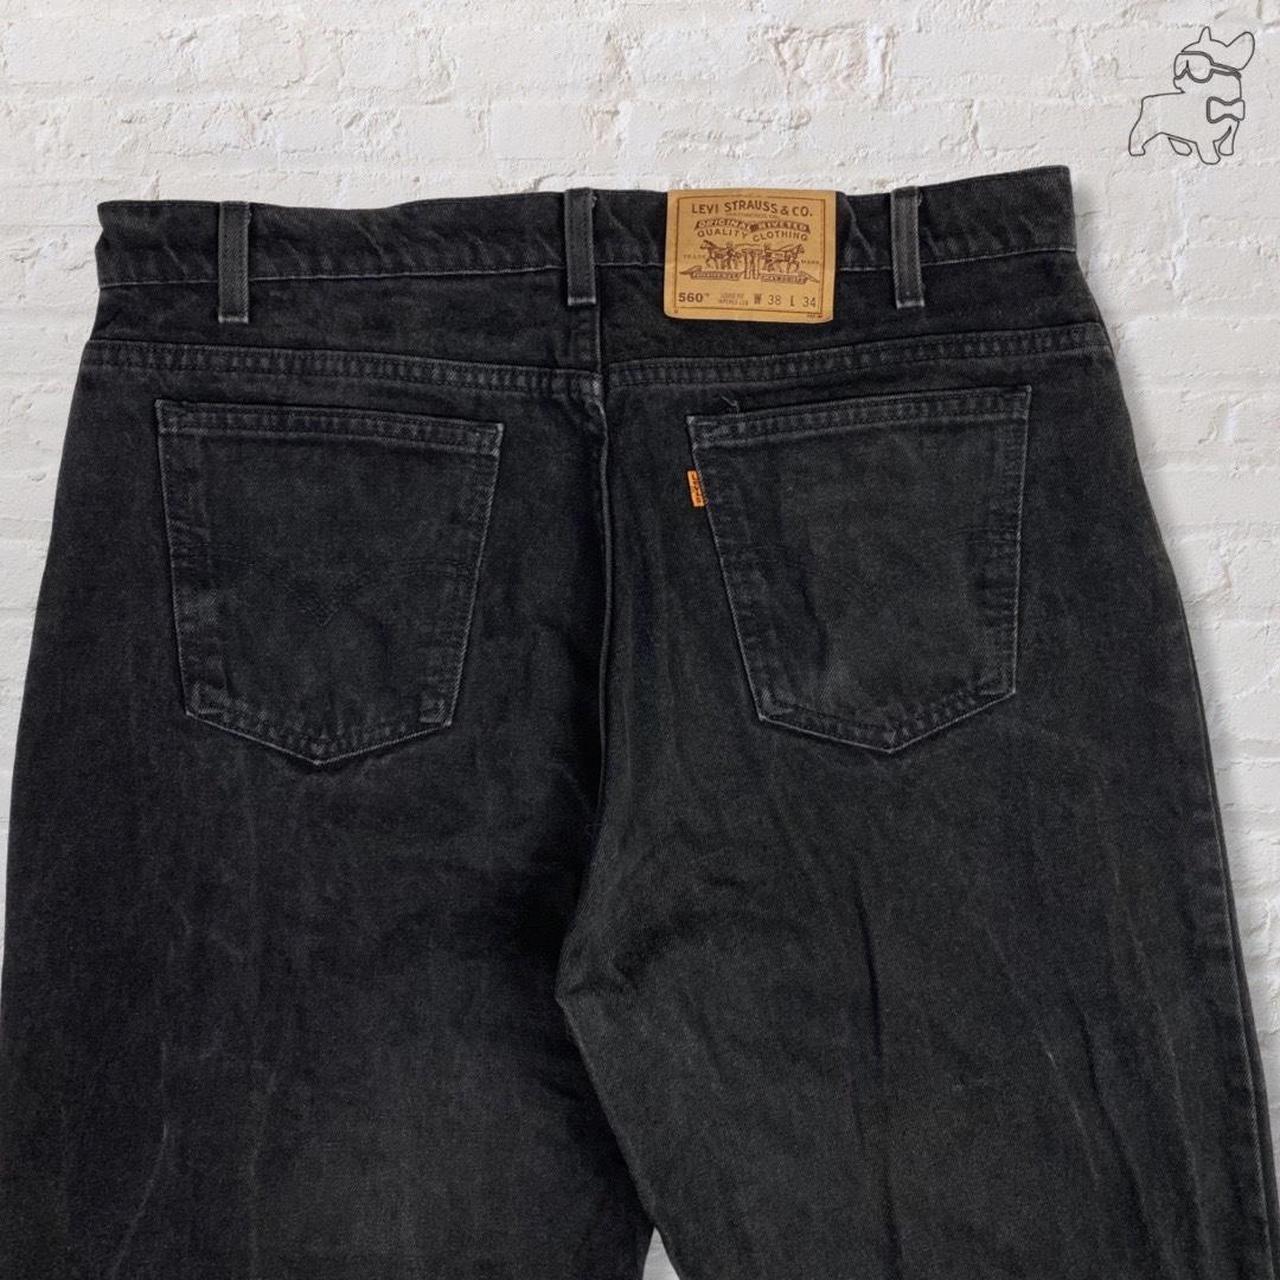 Levi’s Jeans black 560 high waist relax fit tapered - Depop